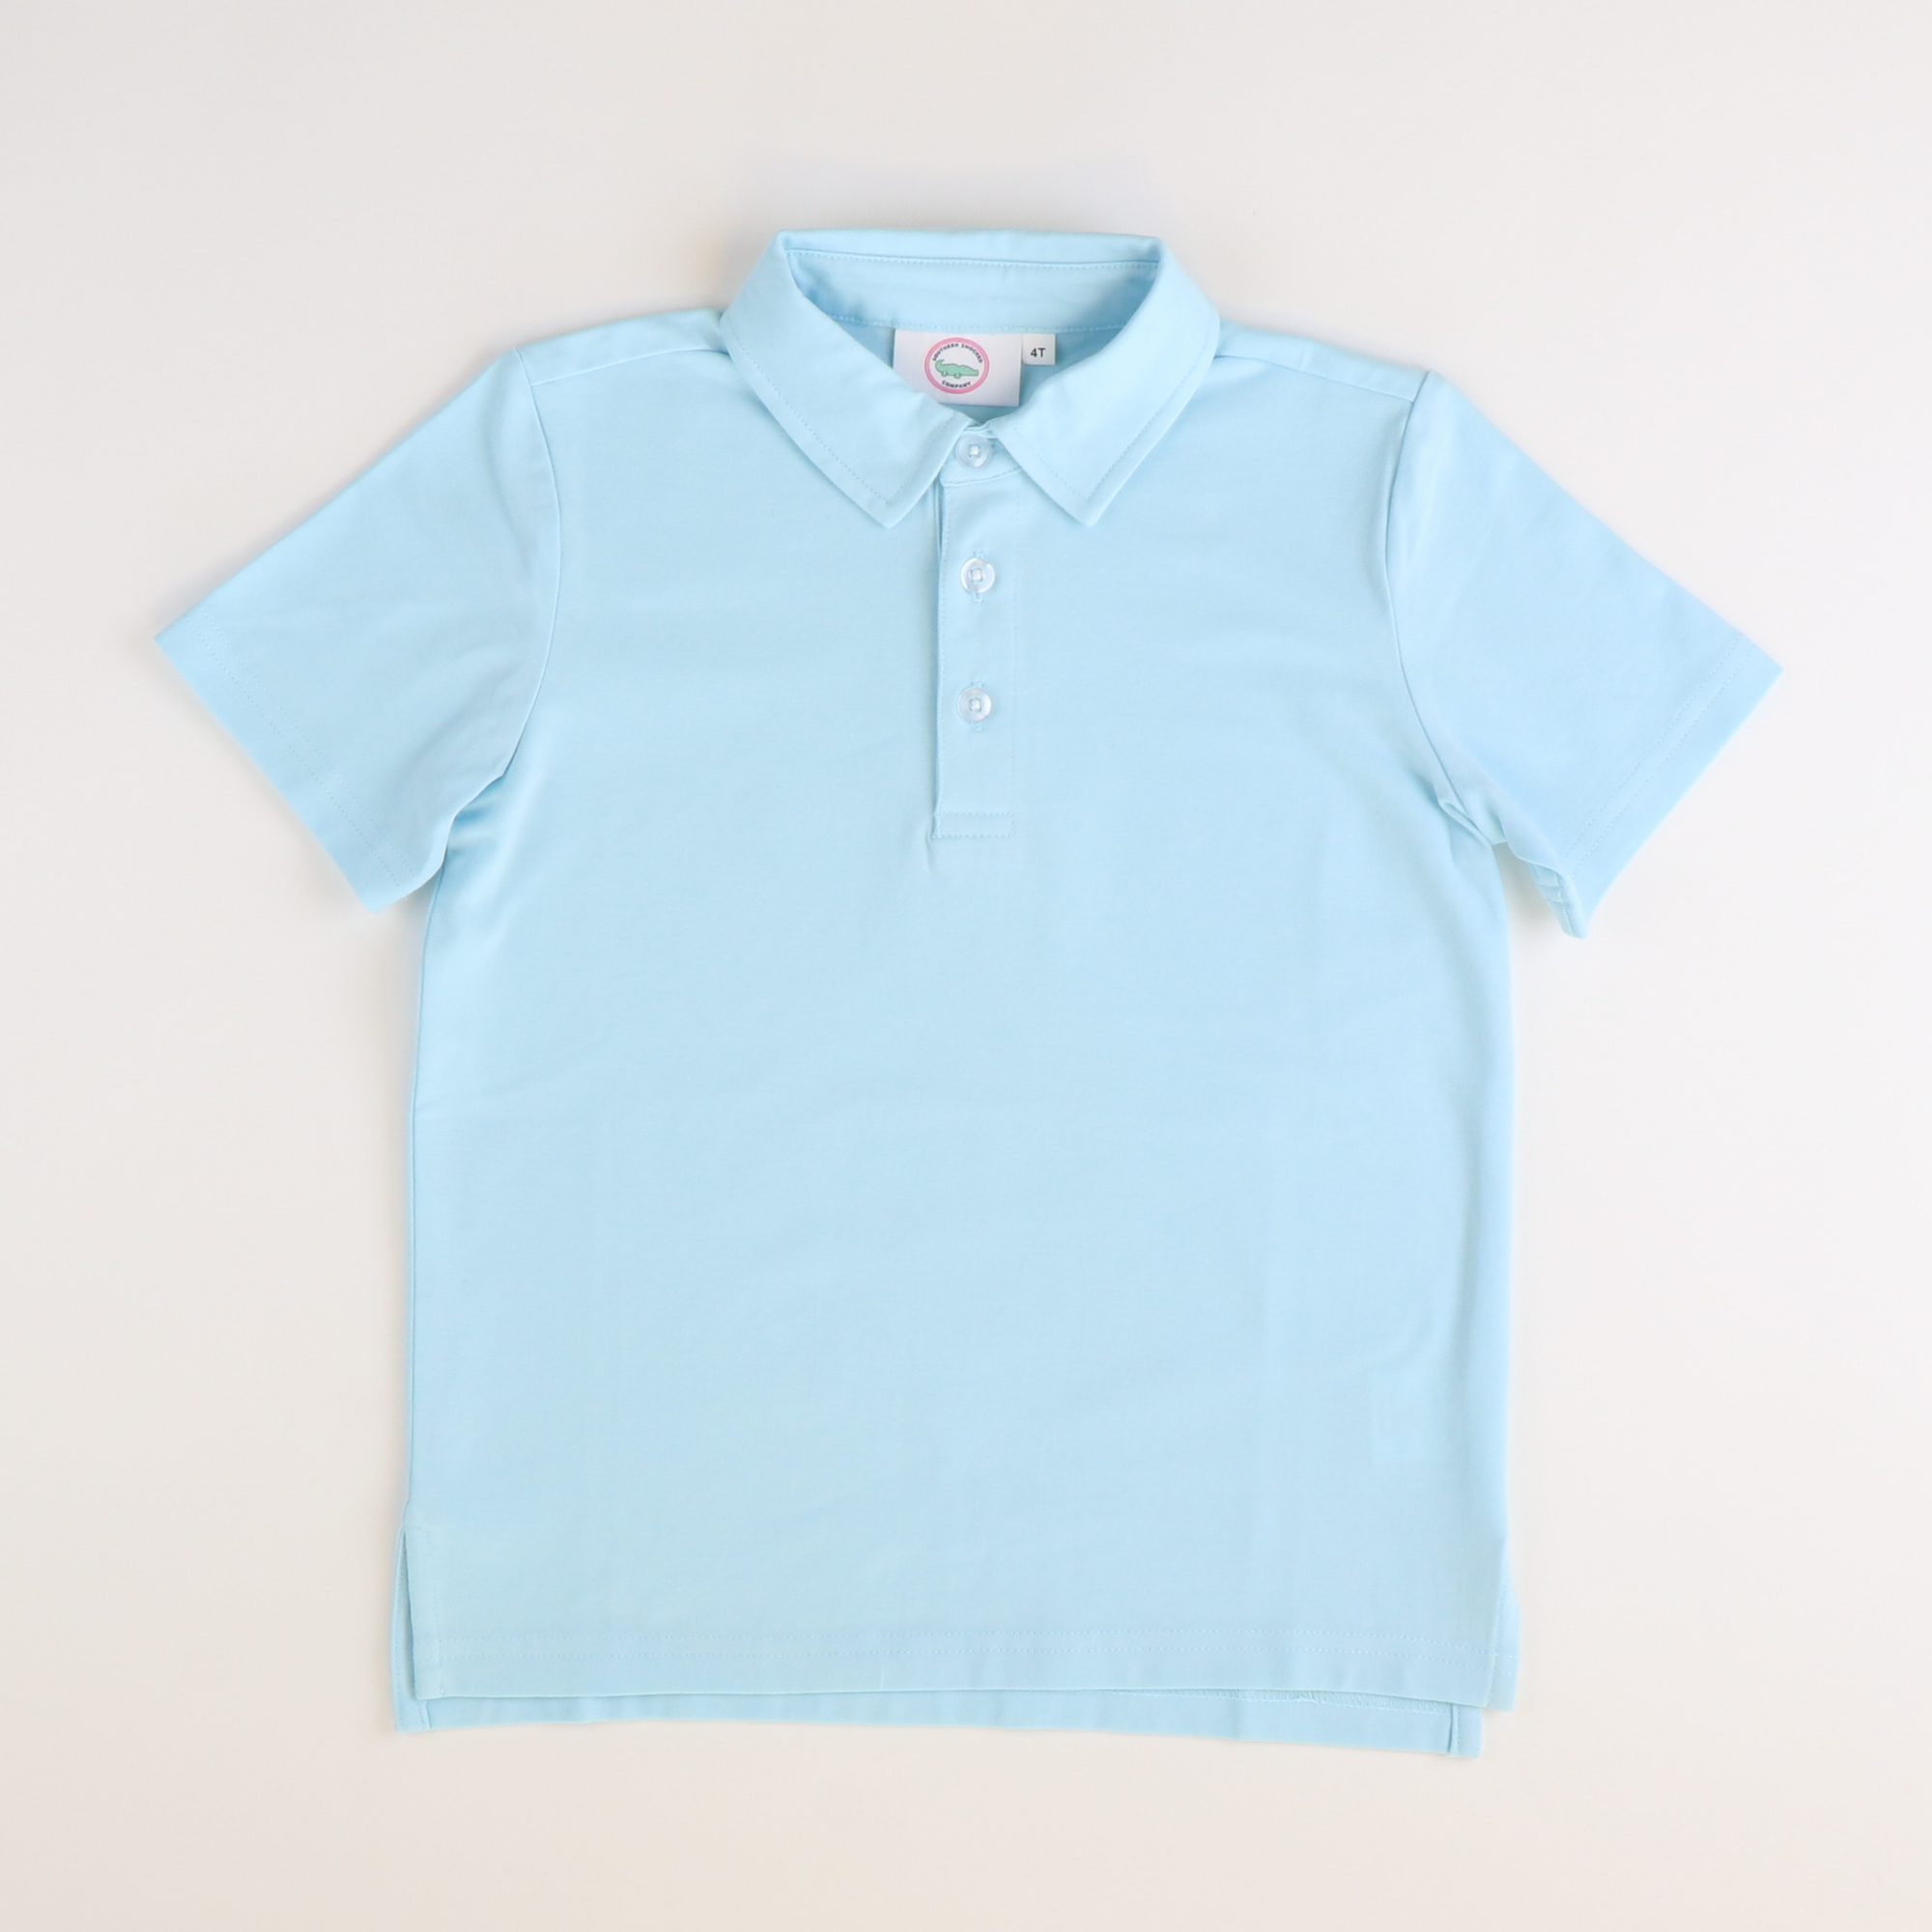 Boys Signature S/S Knit Polo - Light Blue Solid